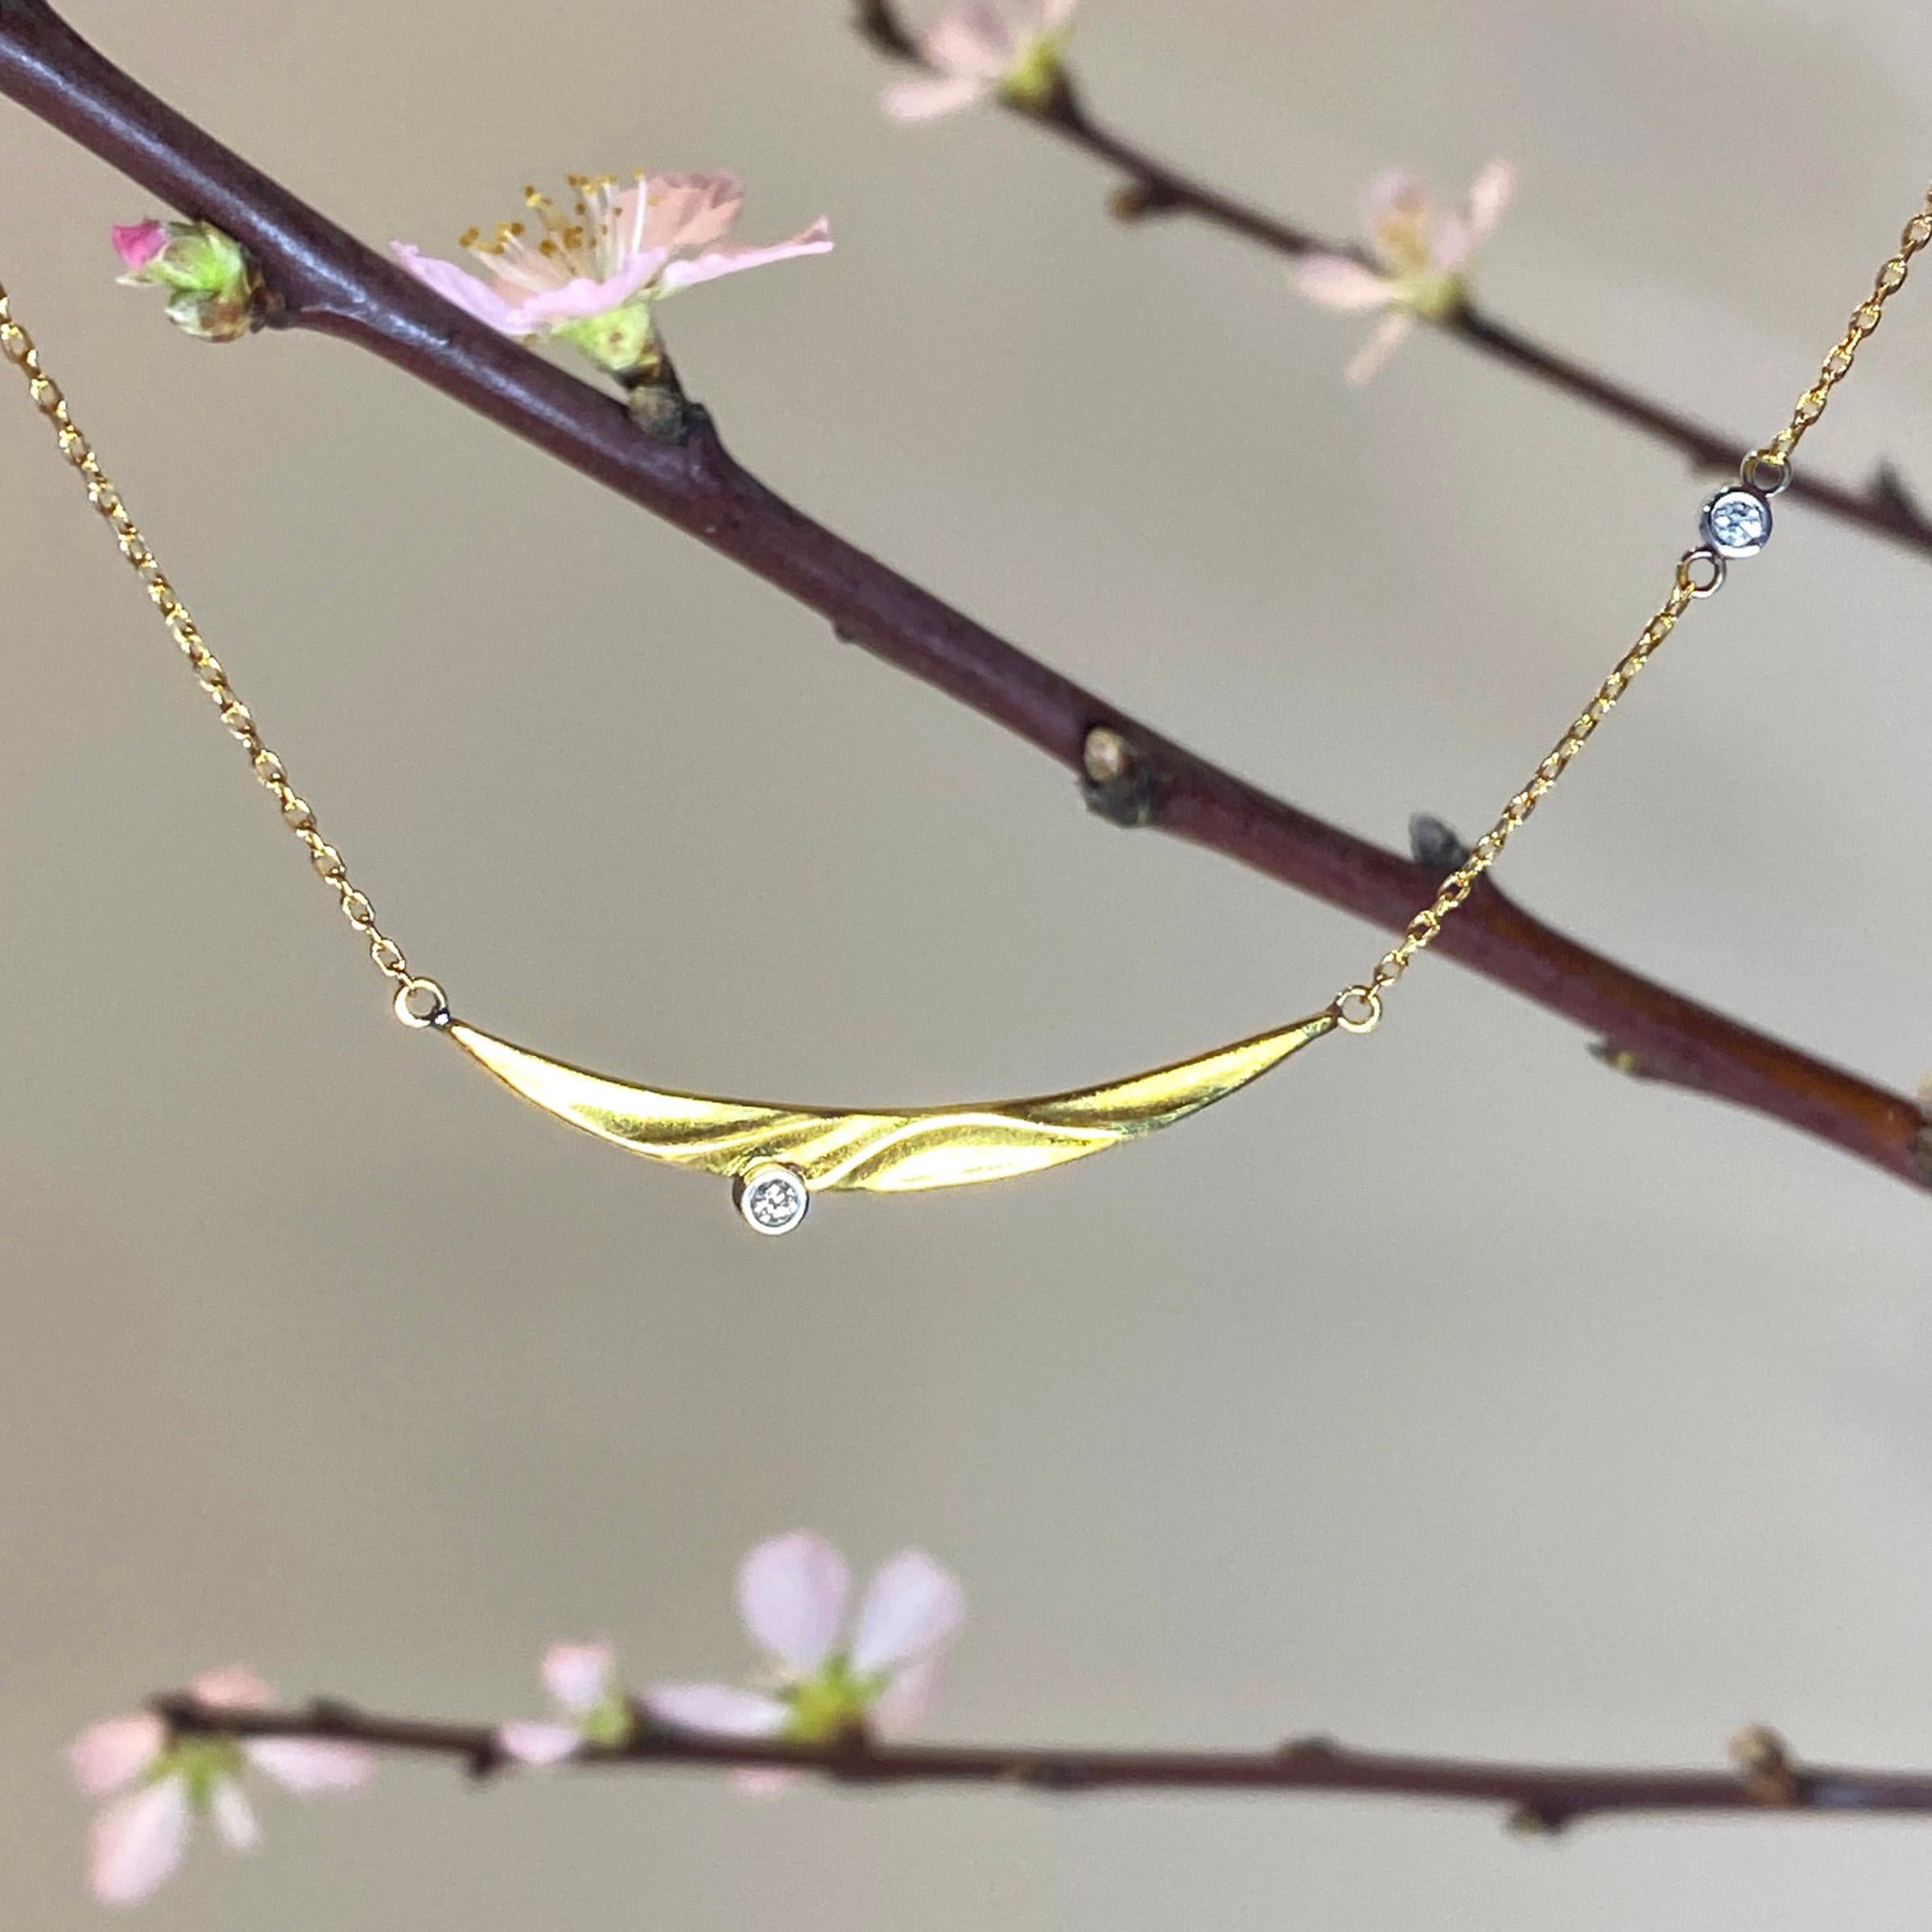 Keiko Mita's modern Seaside Necklace is handmade by the artist from 18 Karat Yellow Gold and 0.06 Carats Diamonds. The contemporary pendant, which is 43 mm wide and 5 mm high, is presented on a diamond cut 18 Karat Gold cable chain that is 16